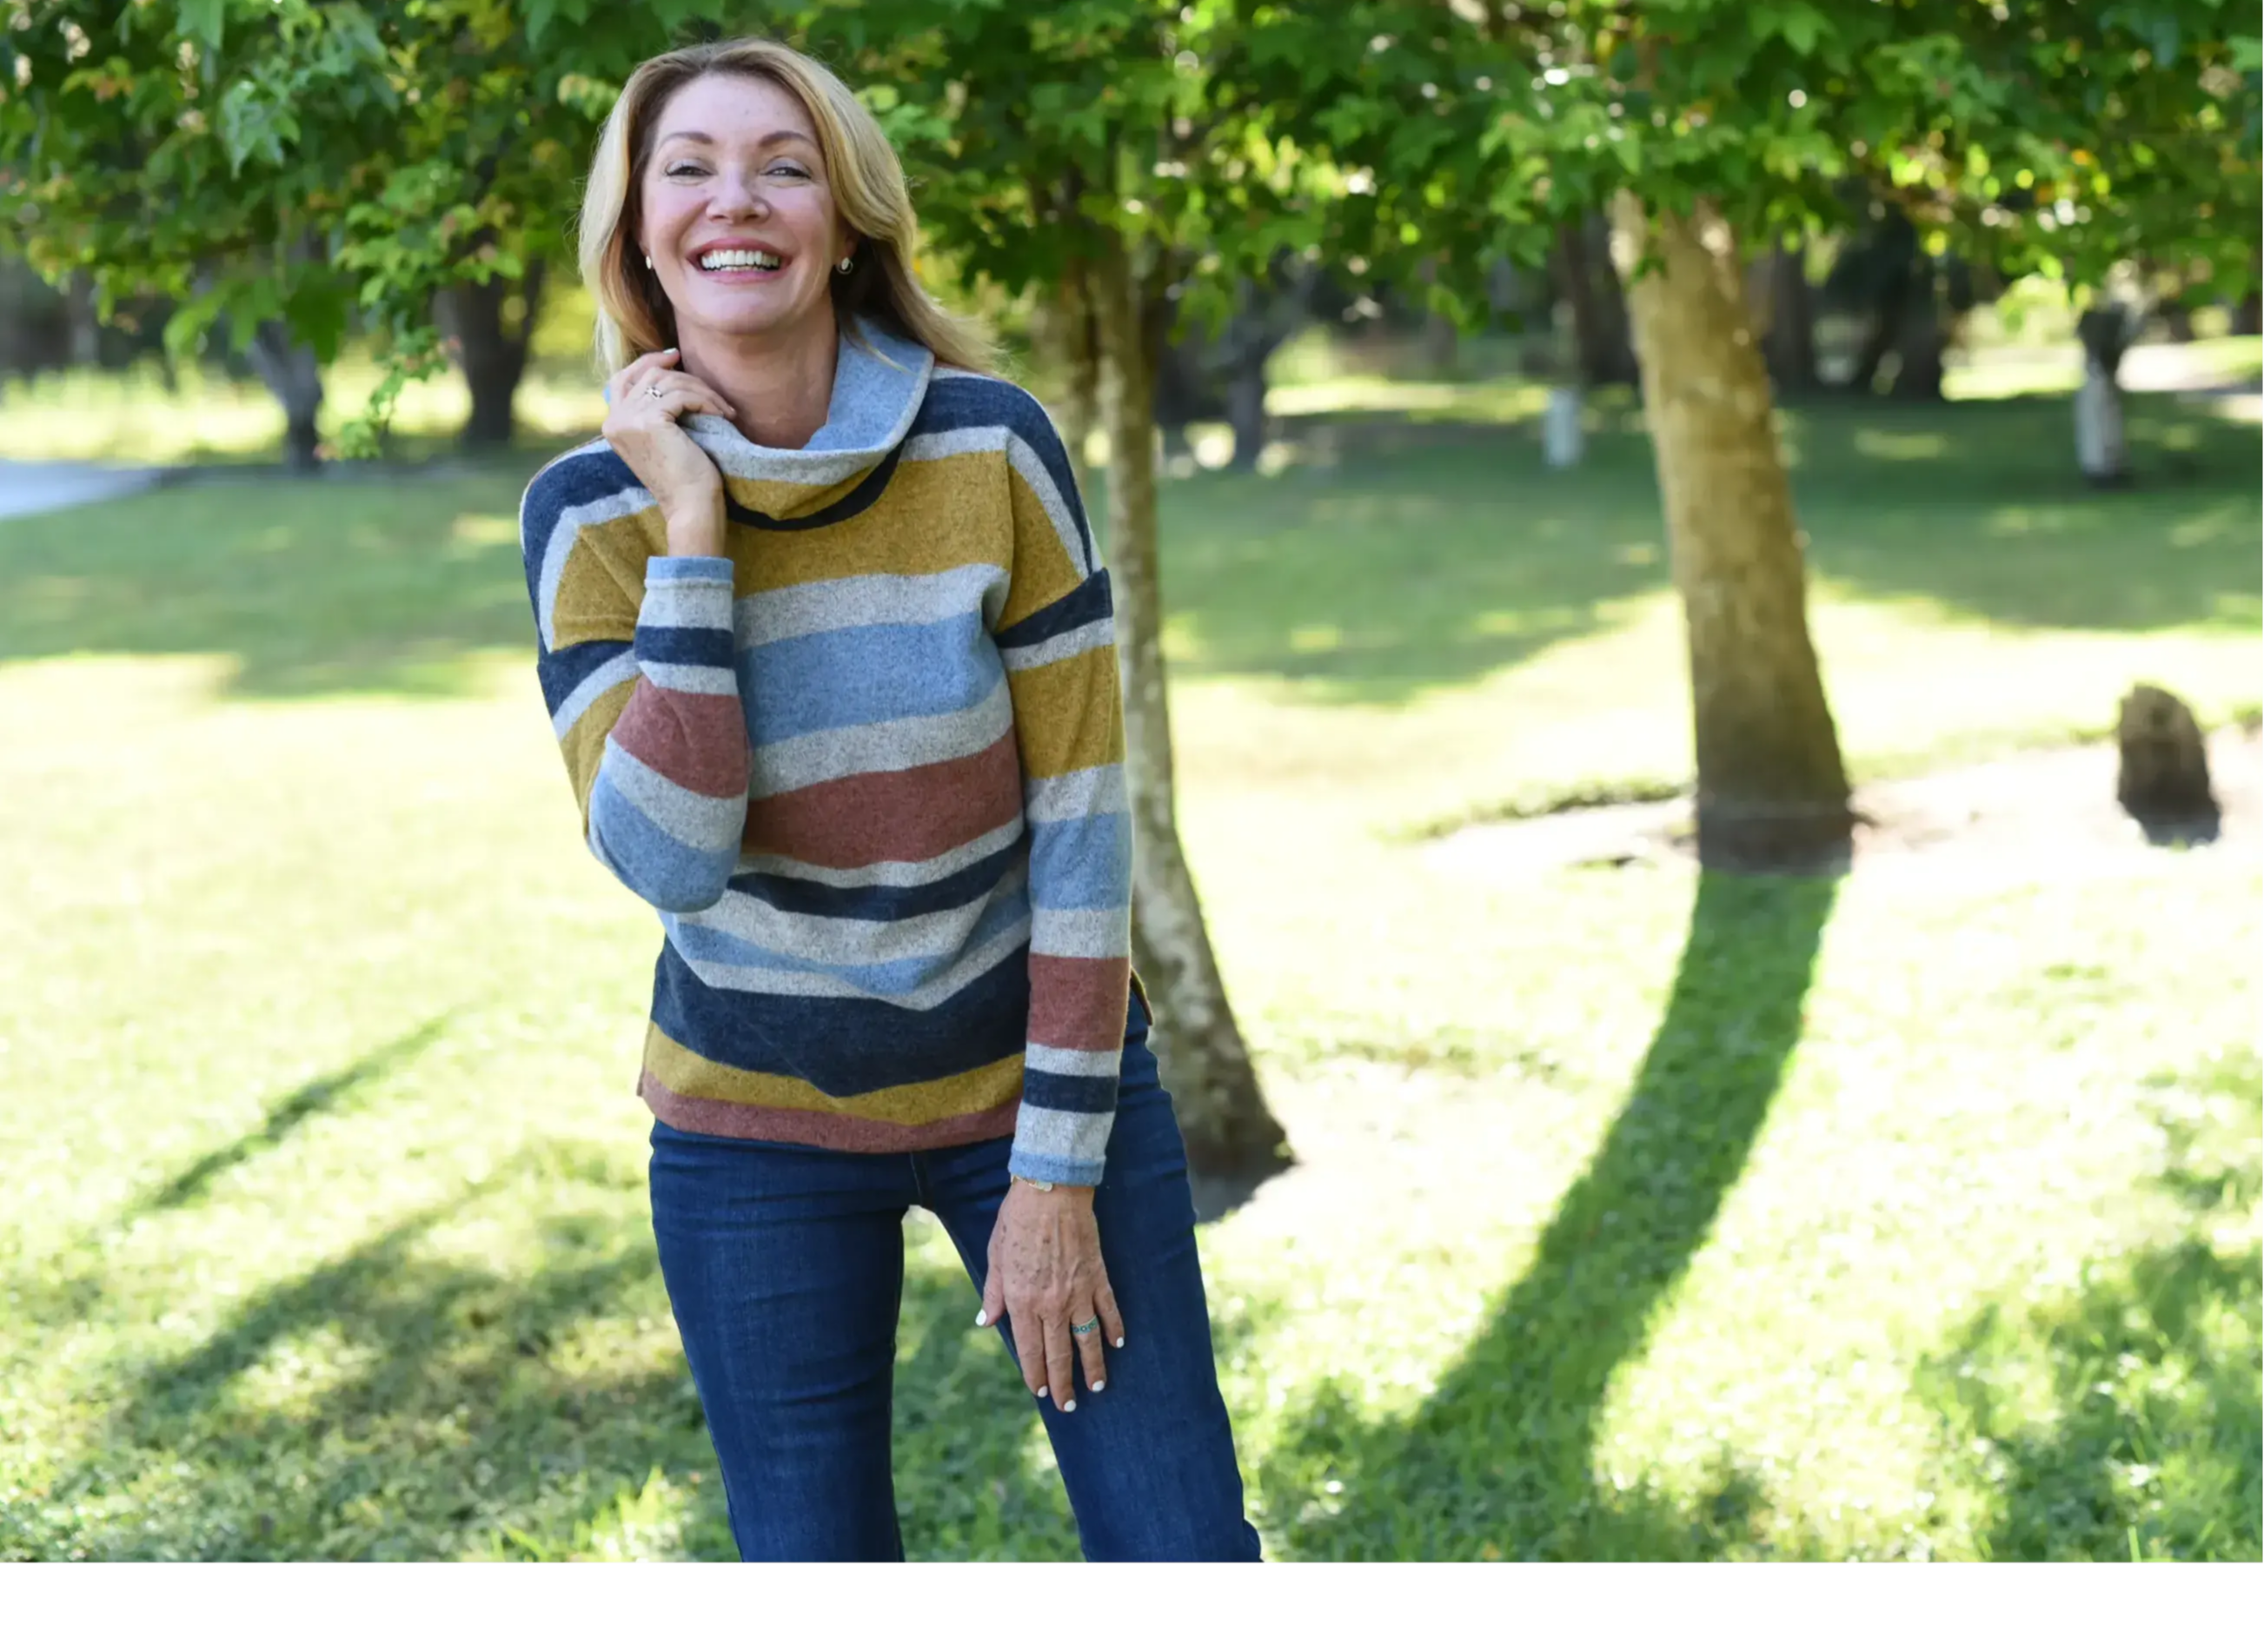 A smiling blonde woman in a striped sweater stands amongst some trees.